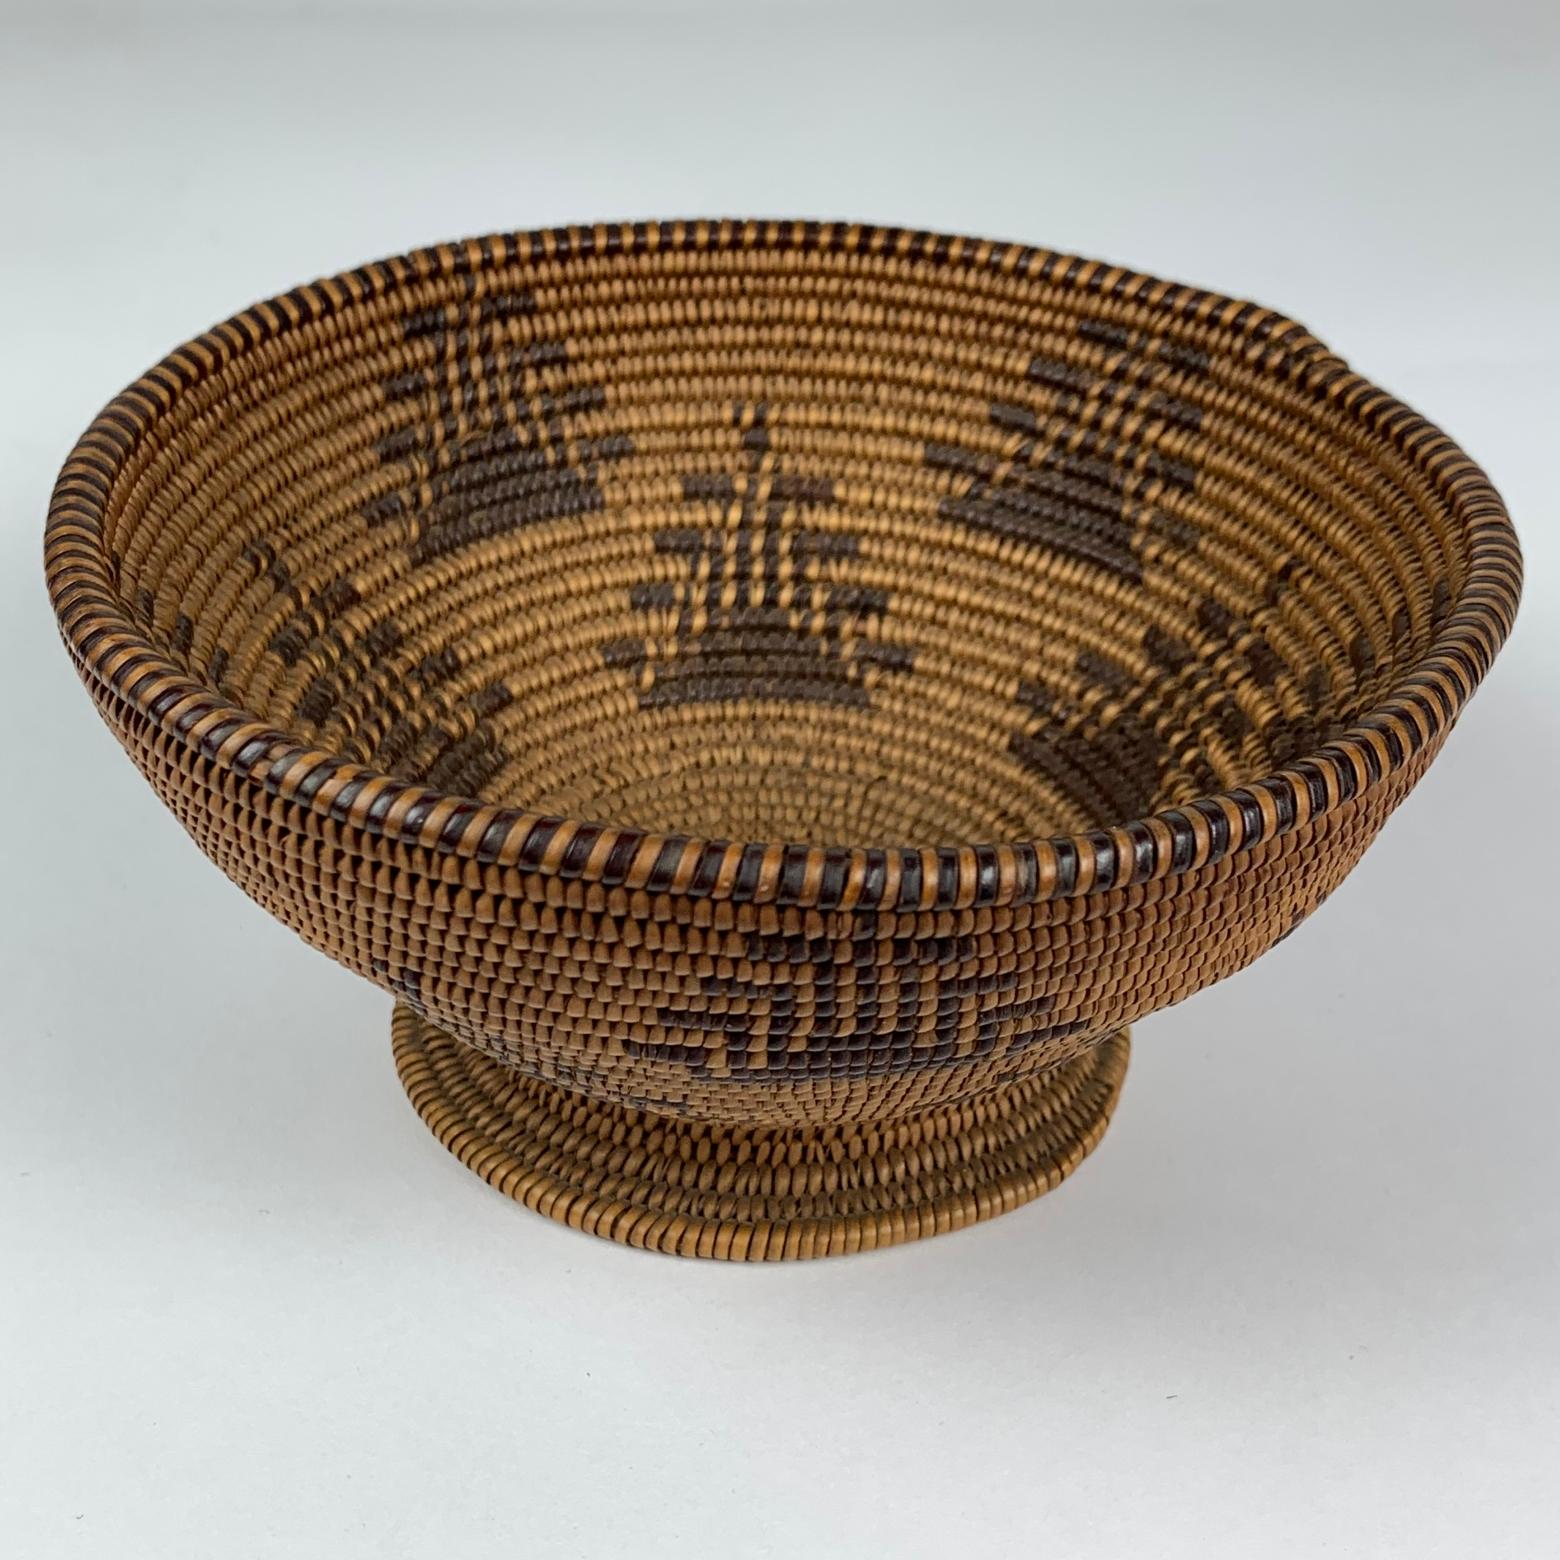 North American Native American Woven Bowl Form Basket For Sale